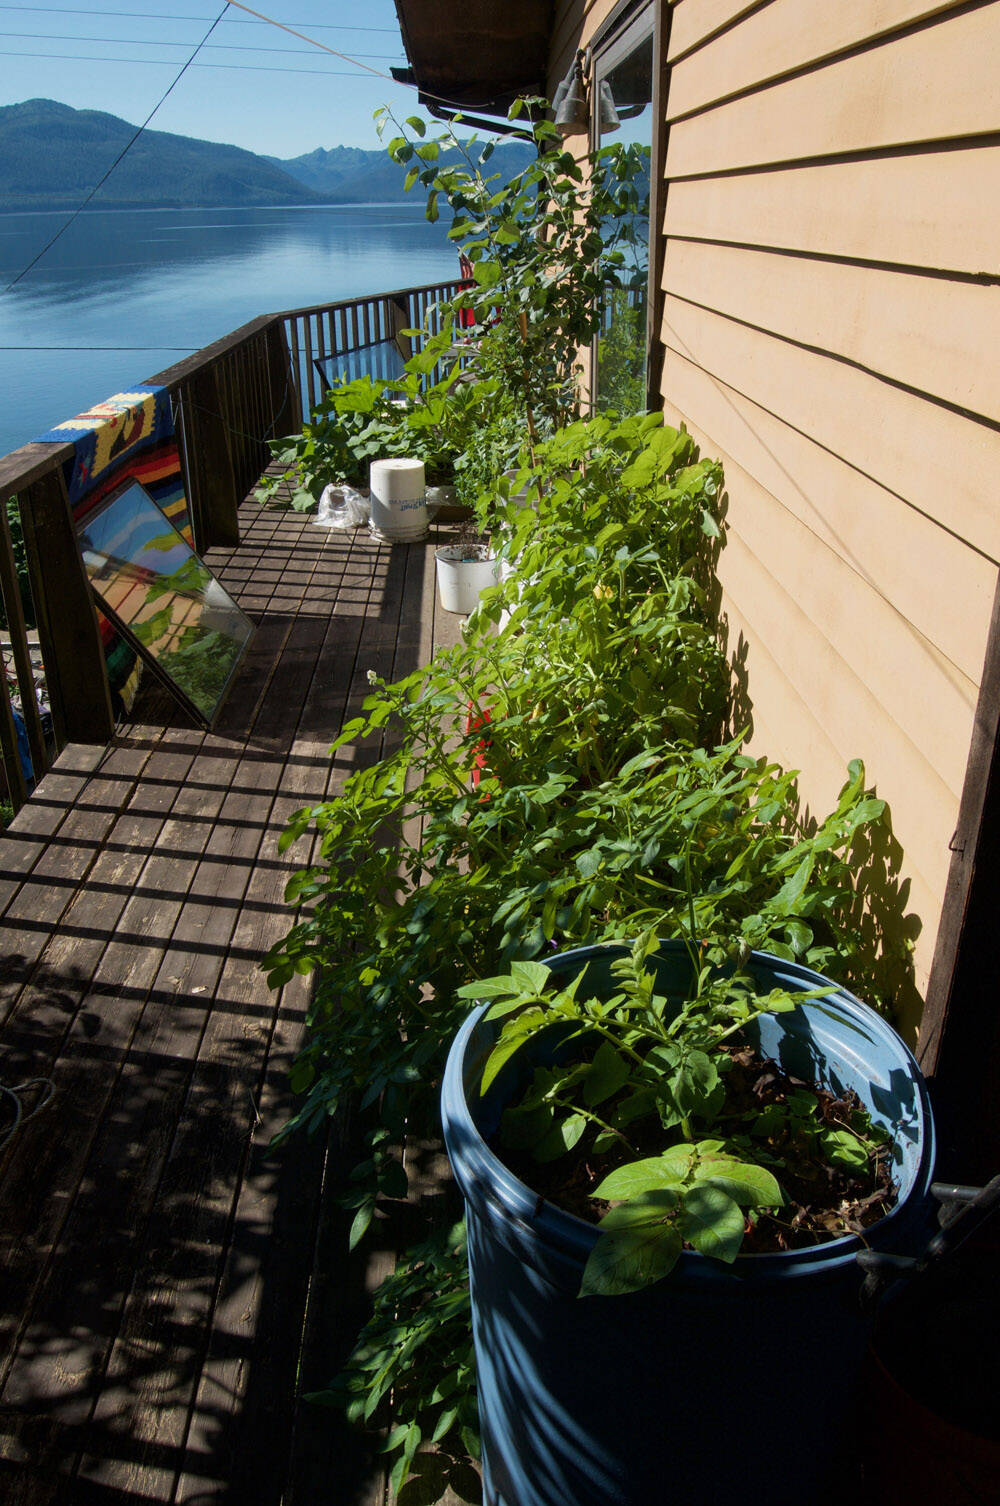 In an attempt to rise above slug attacks, the author grows her garden in containers on the deck overlooking Tenakee Inlet. (Photo by Dimitra Lavrakas)